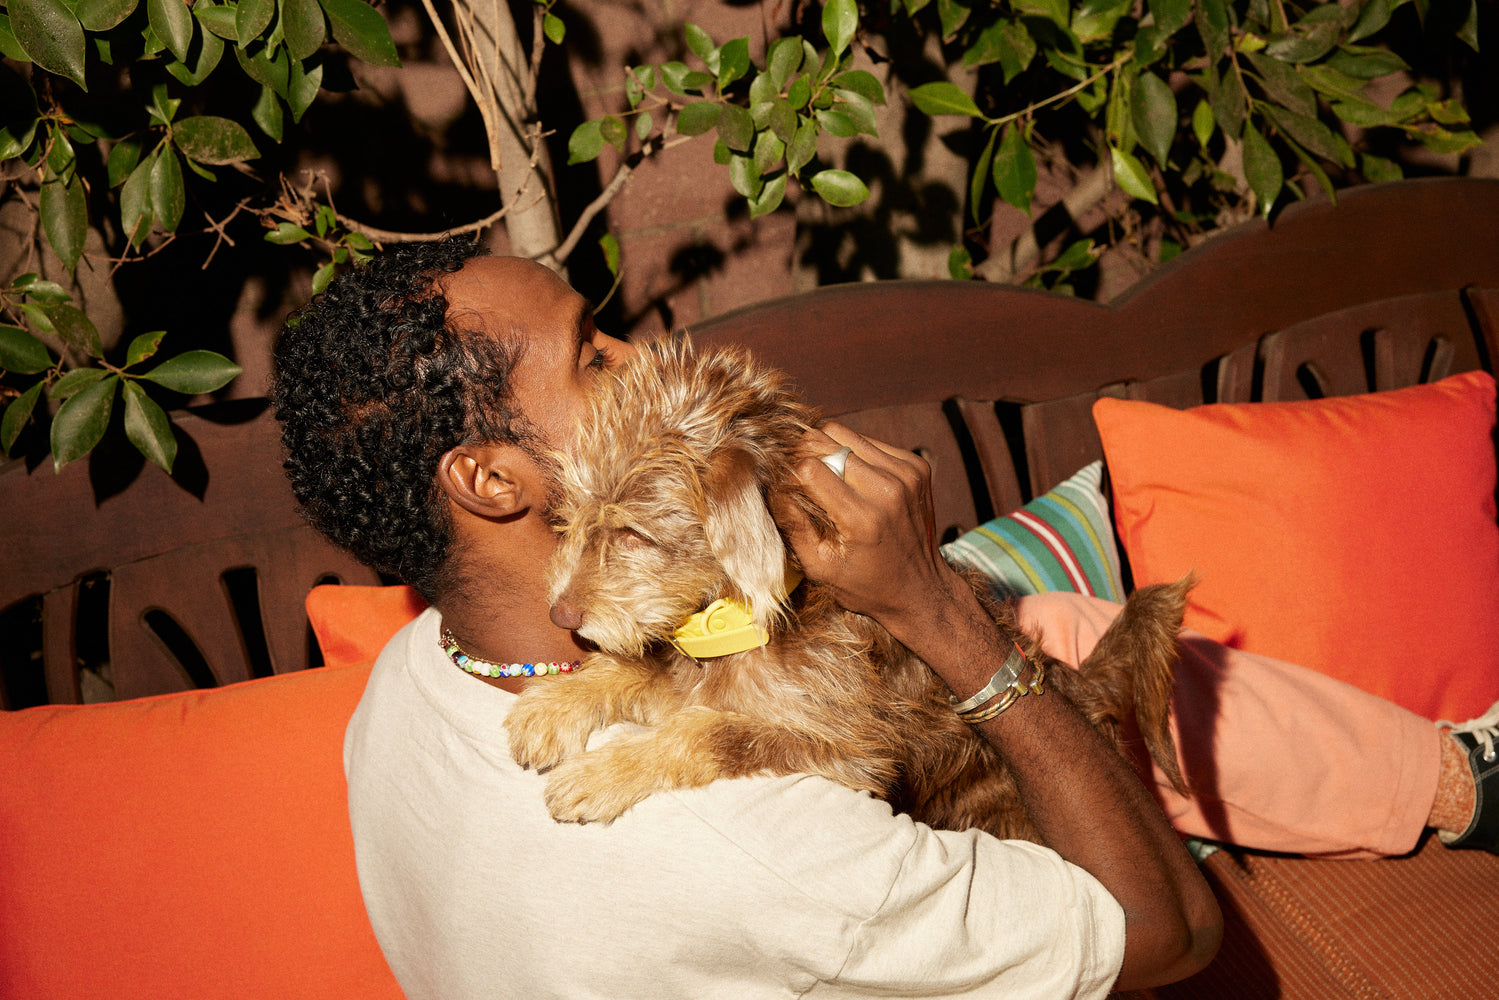 A man lounging on patio furniture hugs his small, furry dog.